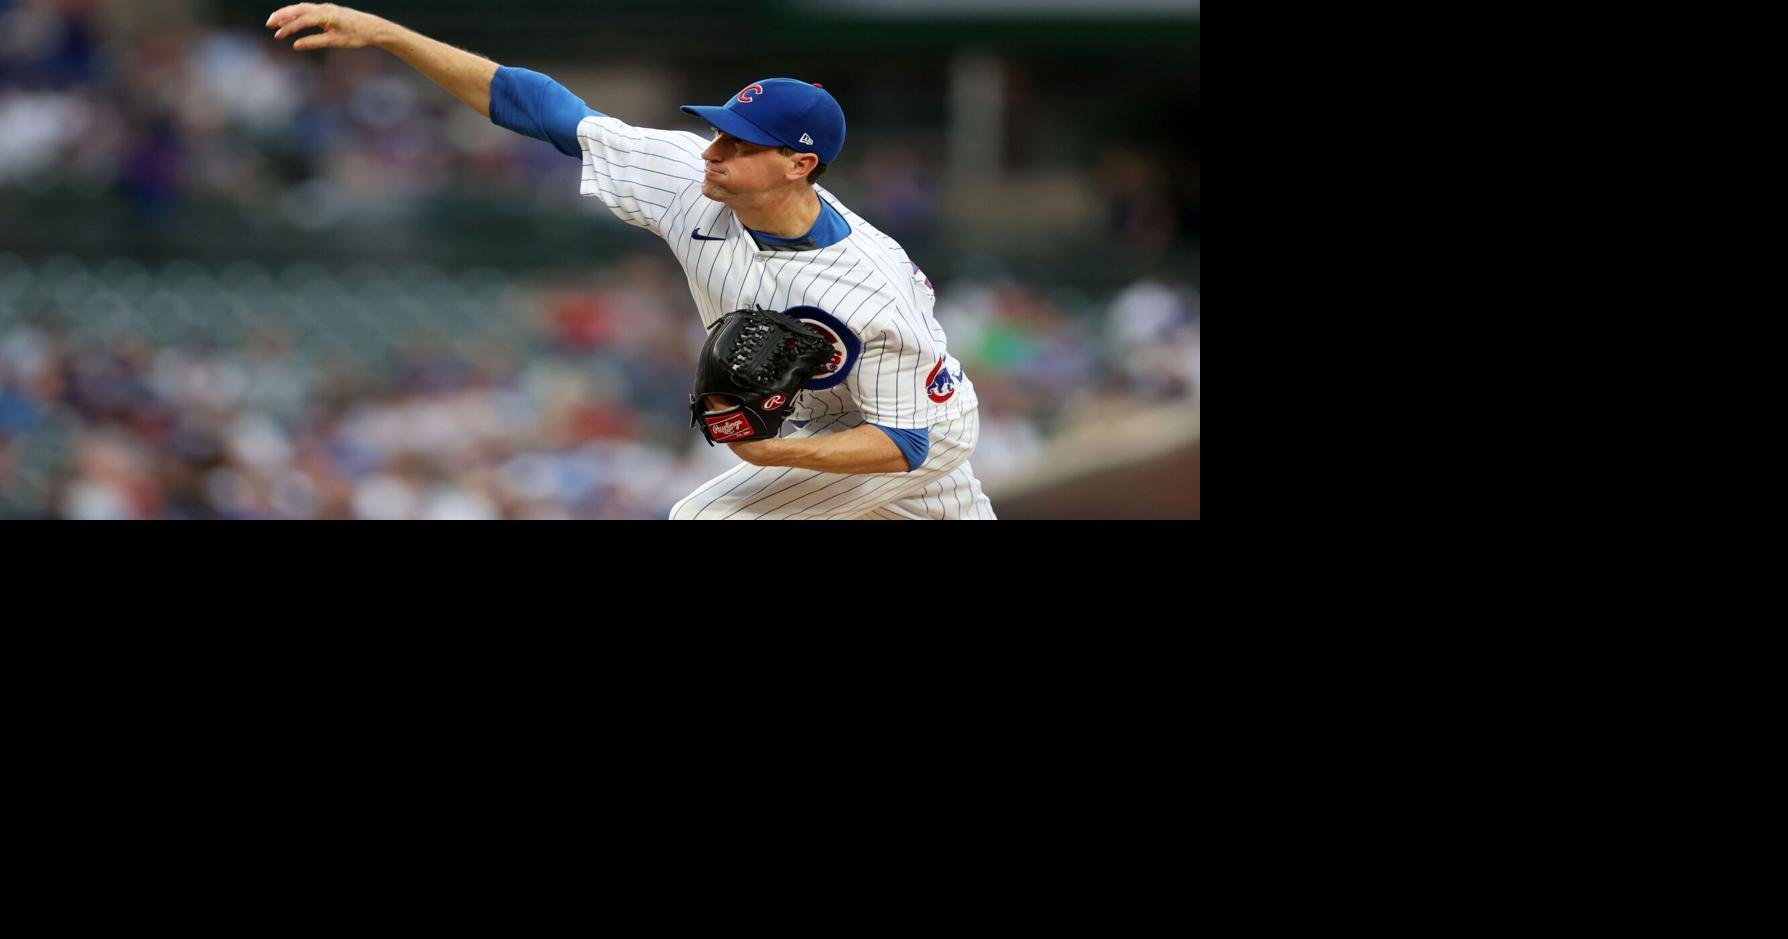 Cubs' Hendricks spins another great outing; future unknown